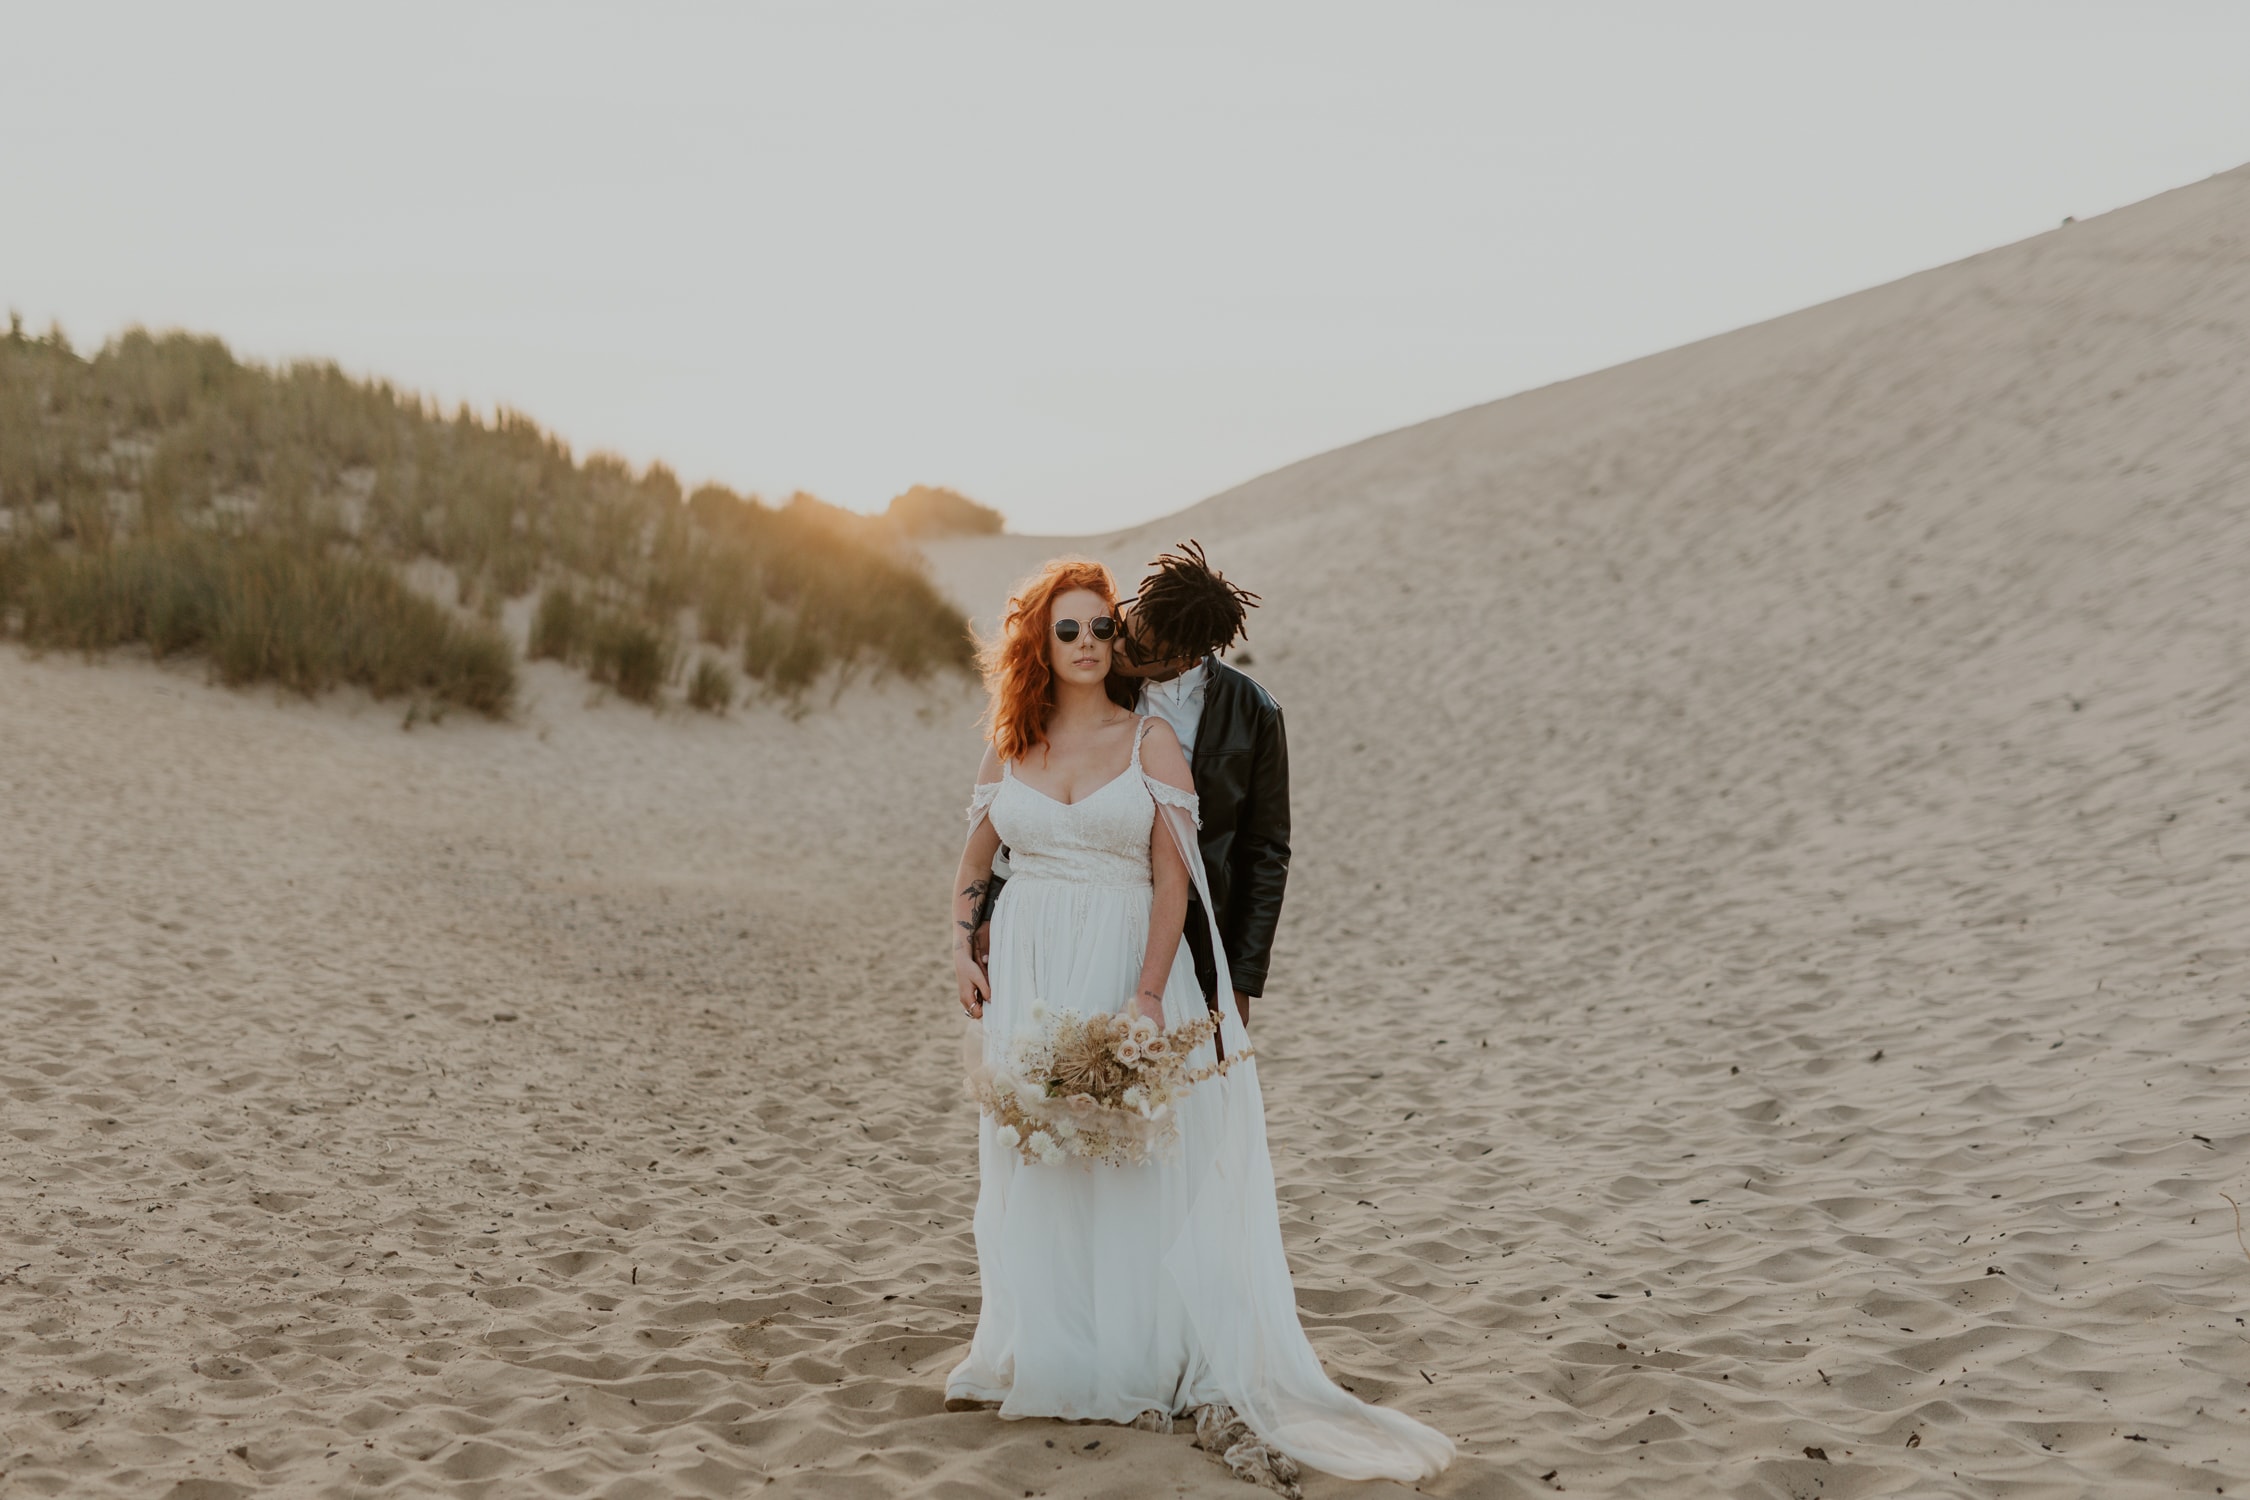 A bride wearing sunglasses looking at the camera while the groom gives her a hug on Cape Kiwanda on Oregon.